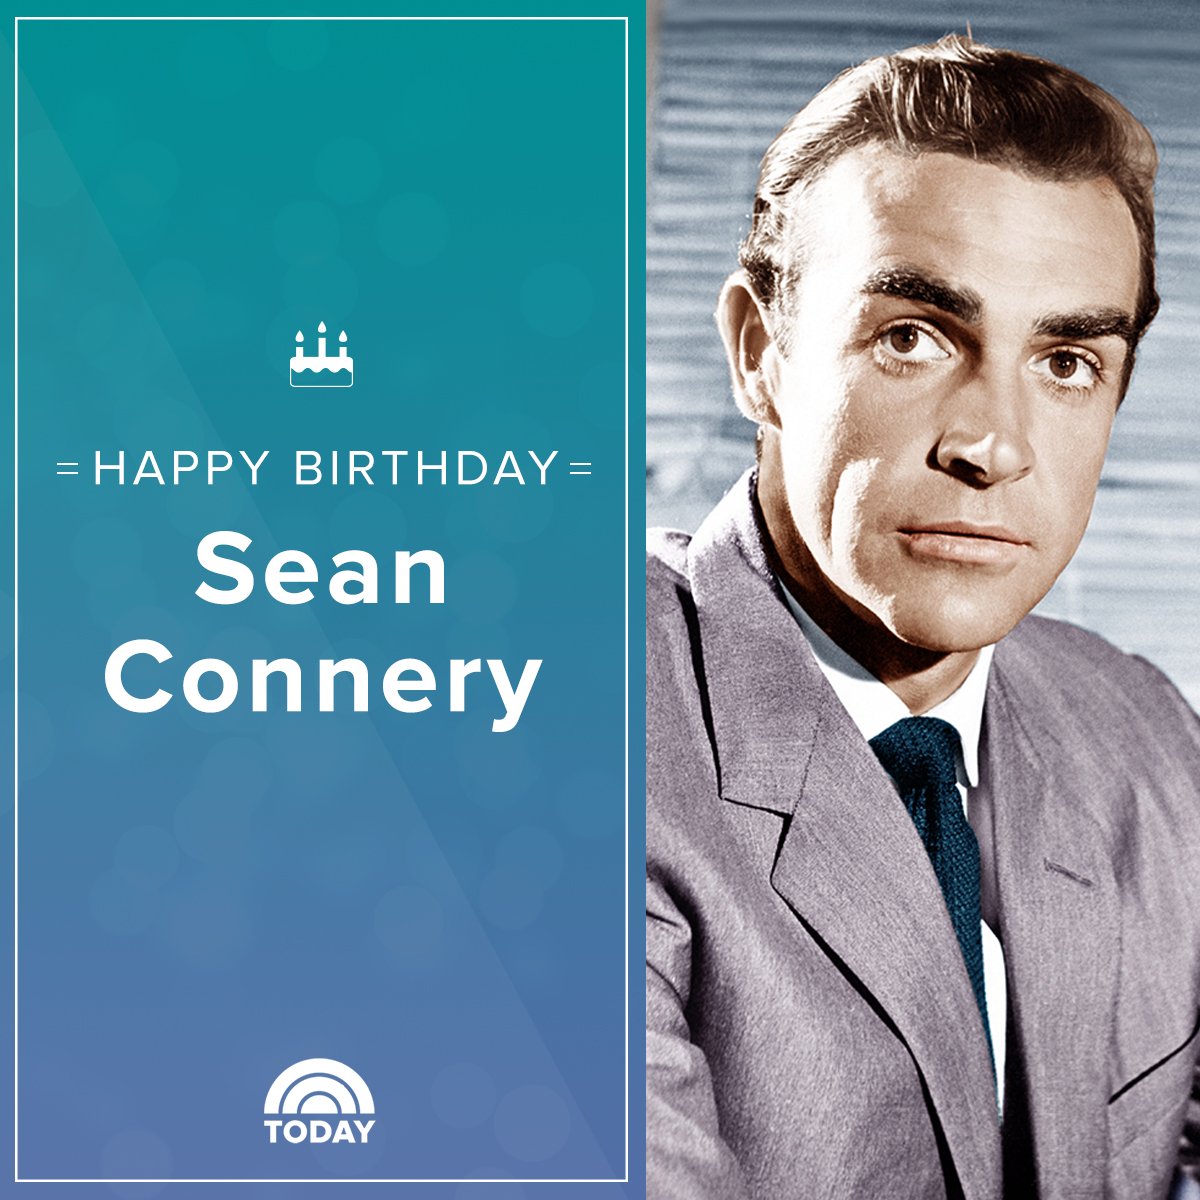 Happy birthday to the dapper Sean Connery!  